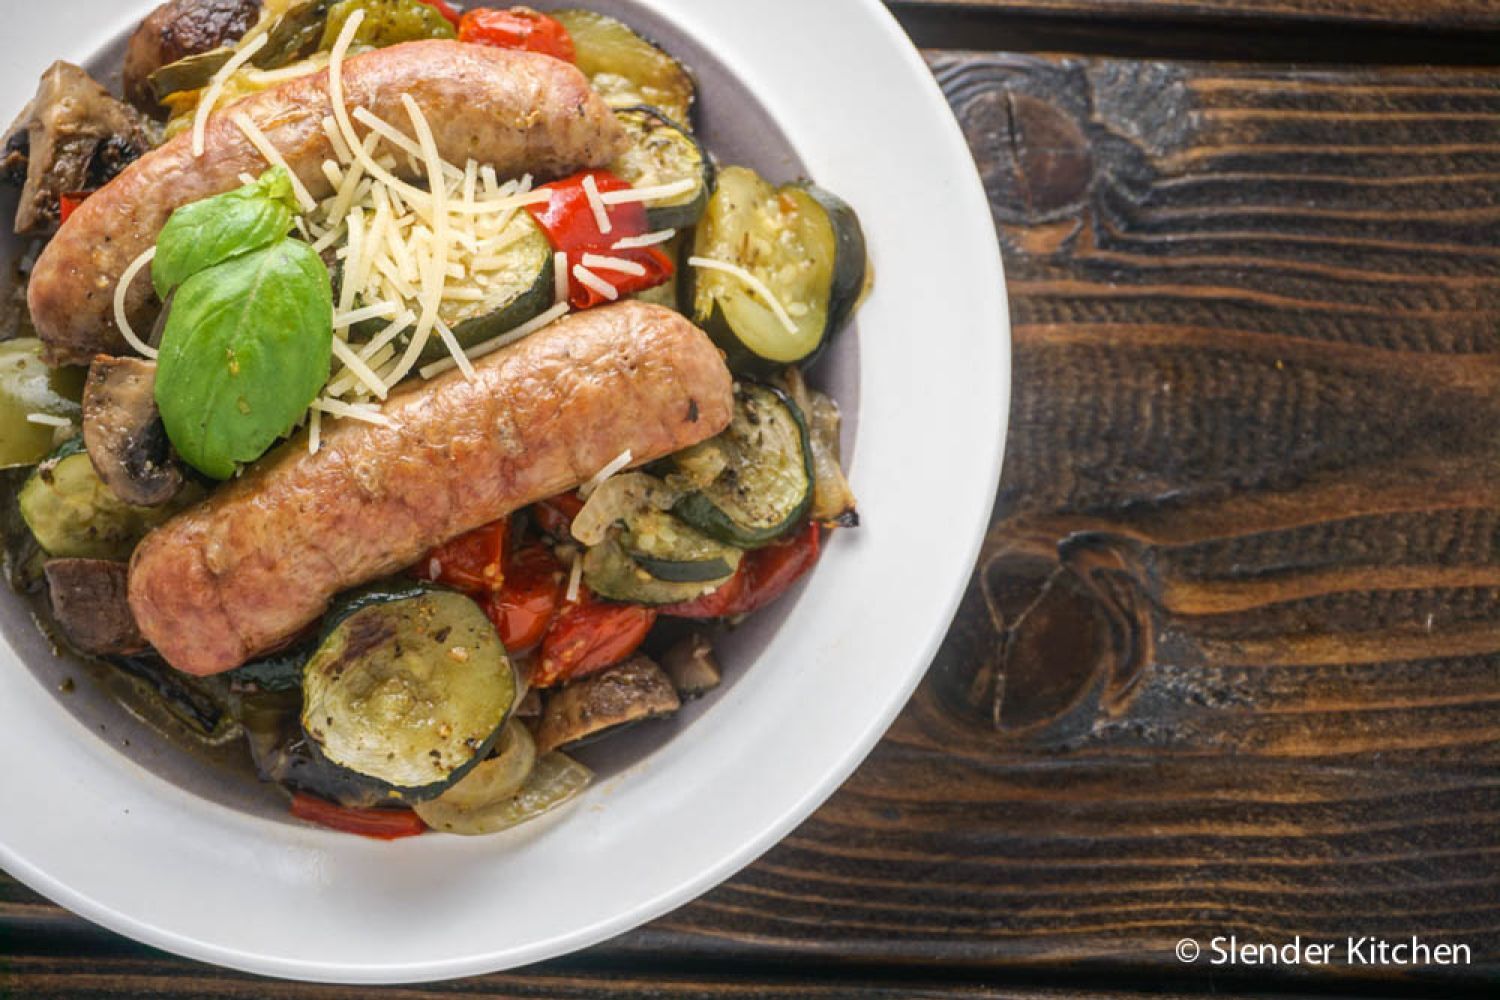 Italian sausages with tomatoes, zucchini, onions, and peppers in a bowl.